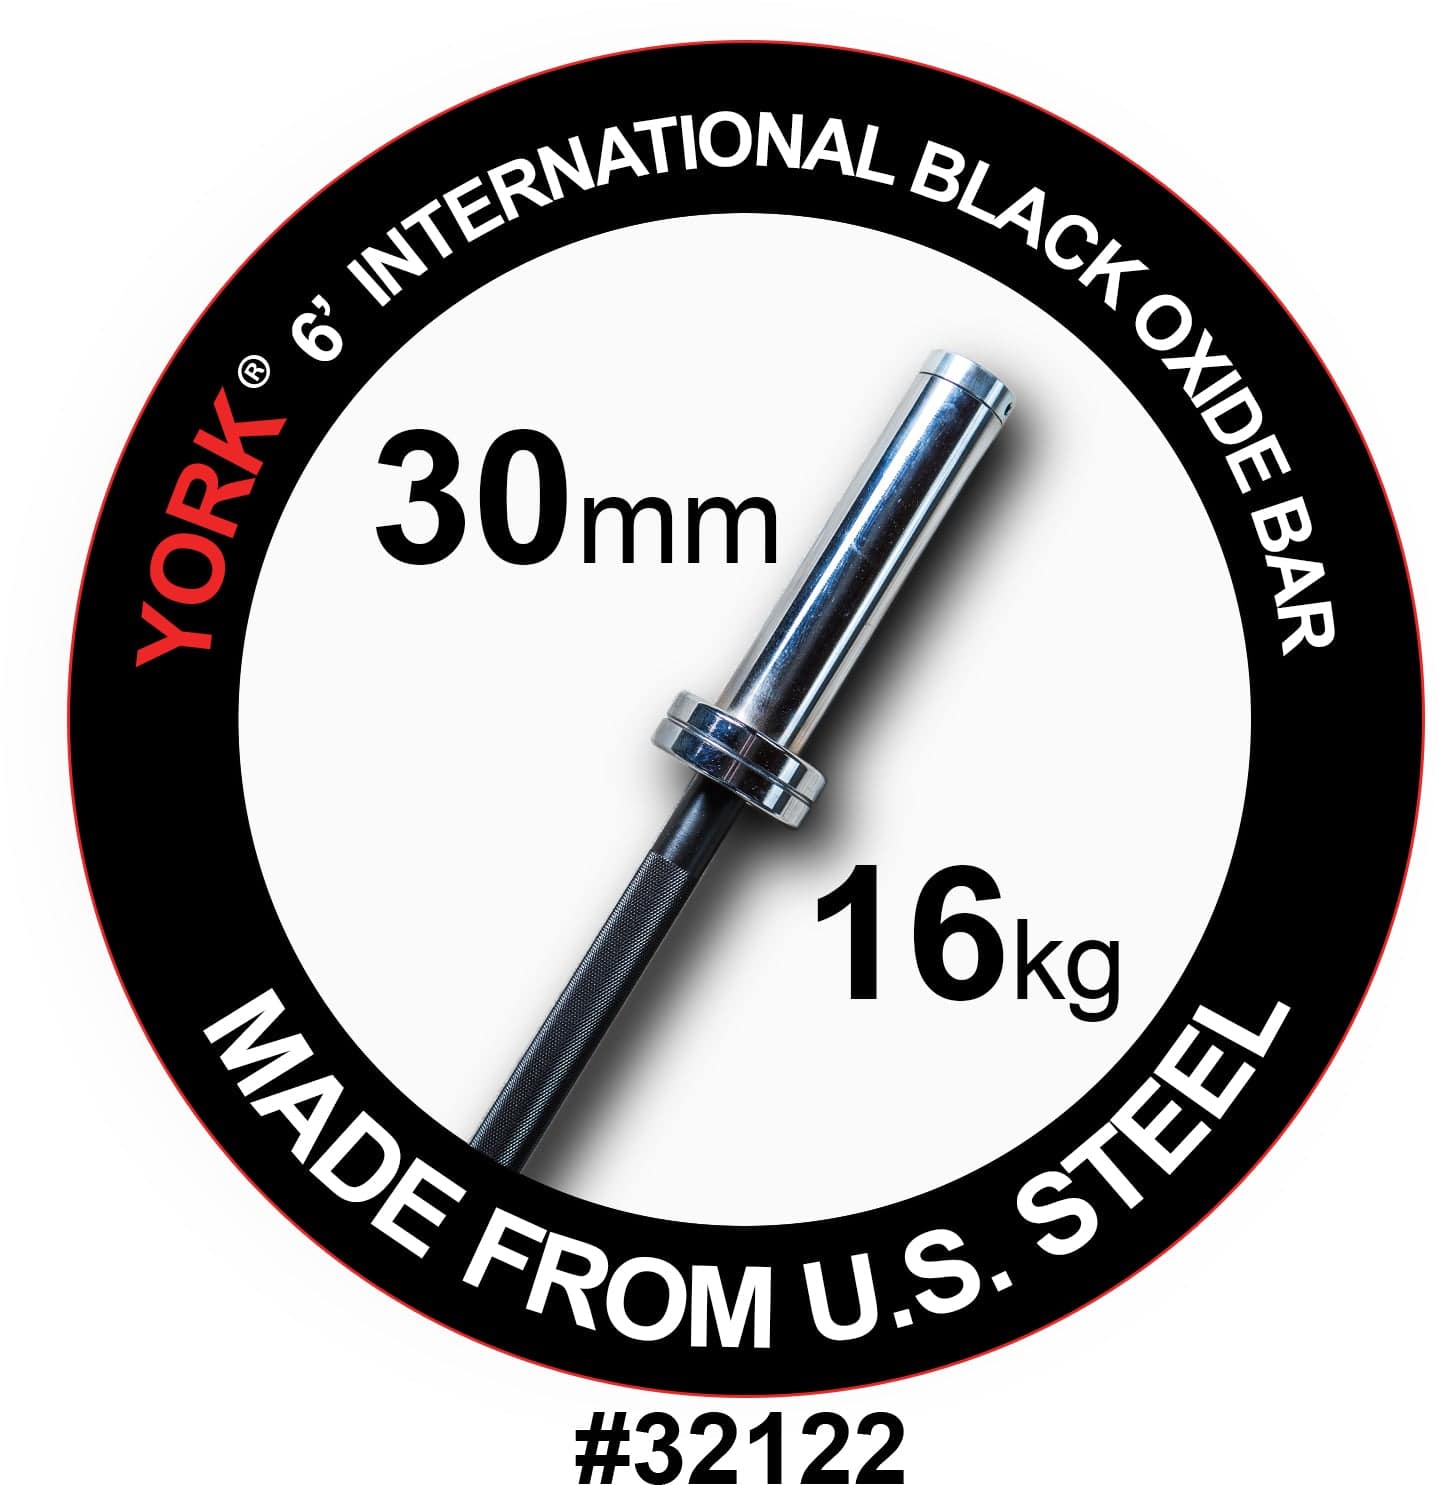 York Barbell | International Black Oxide Bar - 6ft (30mm) - XTC Fitness - Exercise Equipment Superstore - Canada - Multi-Purpose Barbell